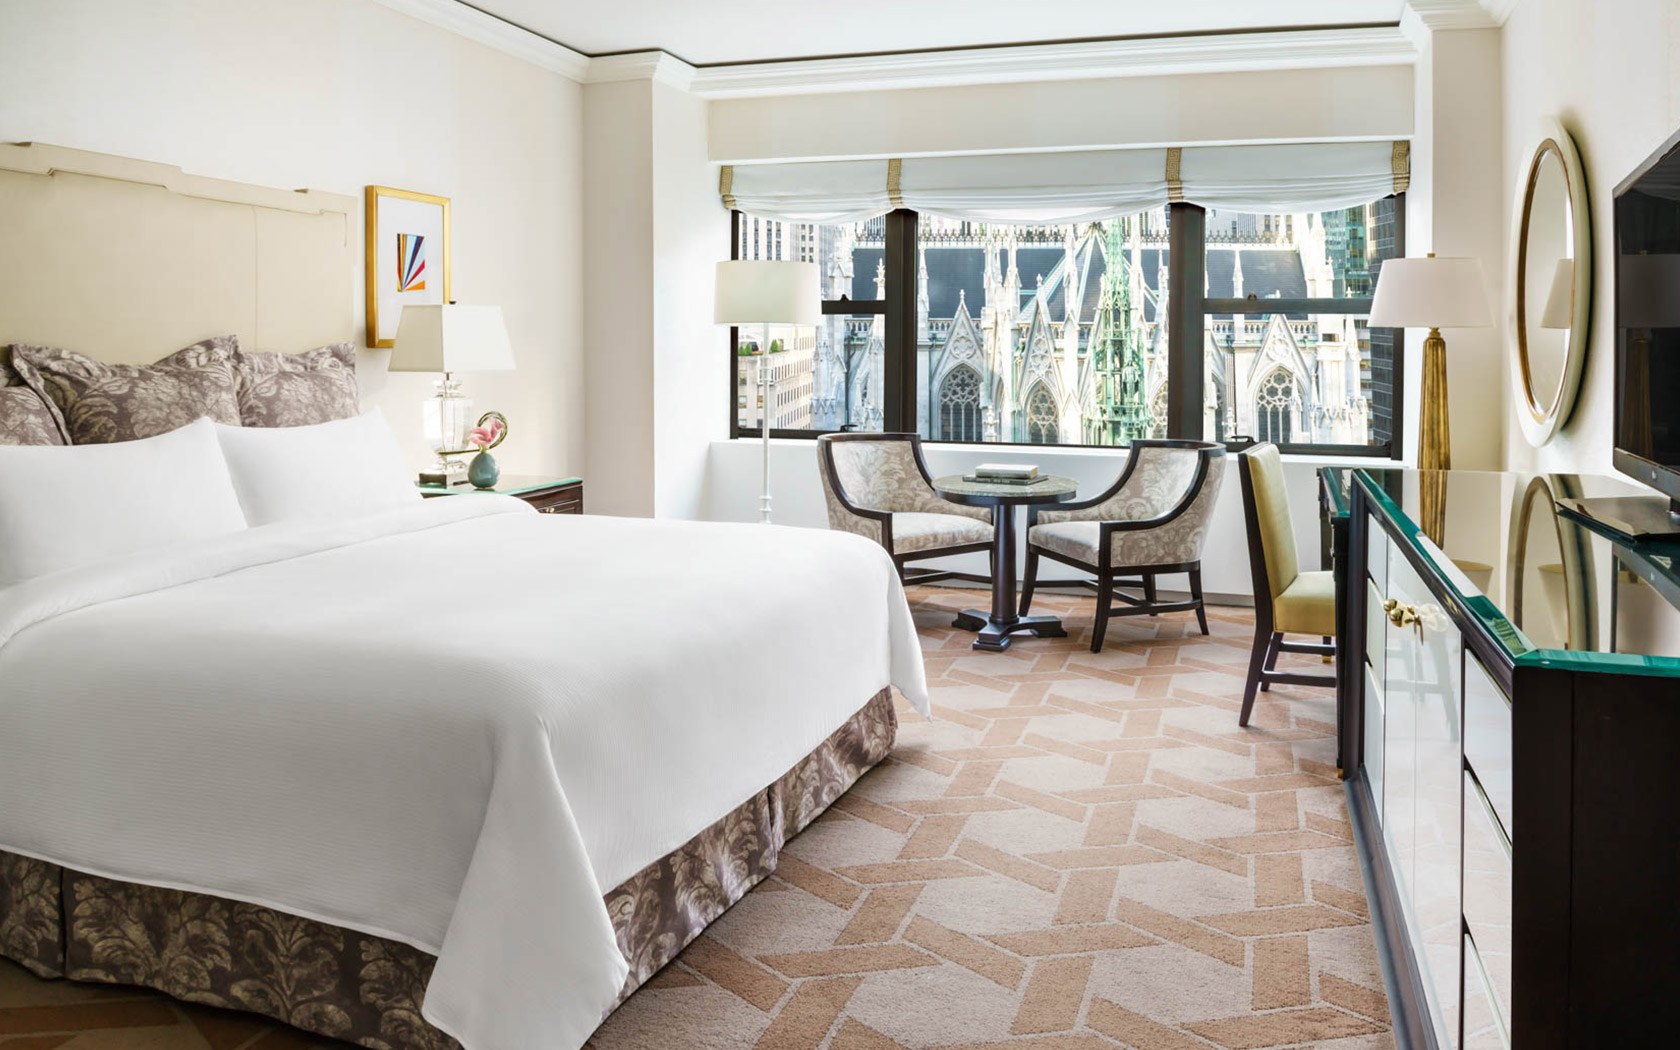 Midtown Manhattan Hotels - The Palace Rooms & Suites | Lotte NYC